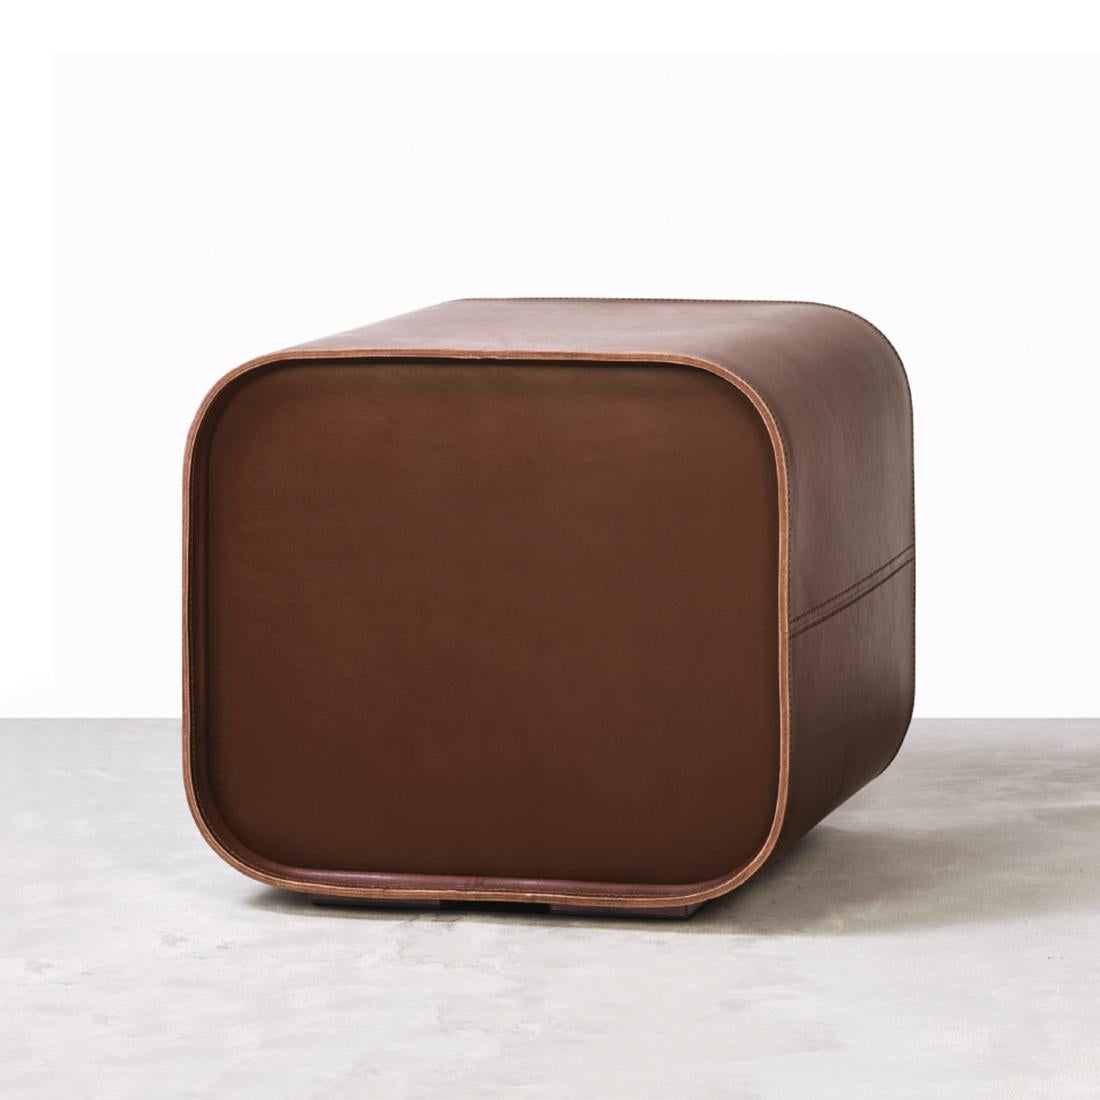 Stool cube leather upholstered stool covered with genuine
brown leather, with apparent stitching. Stool with 4 feet and
with water resistant leather.